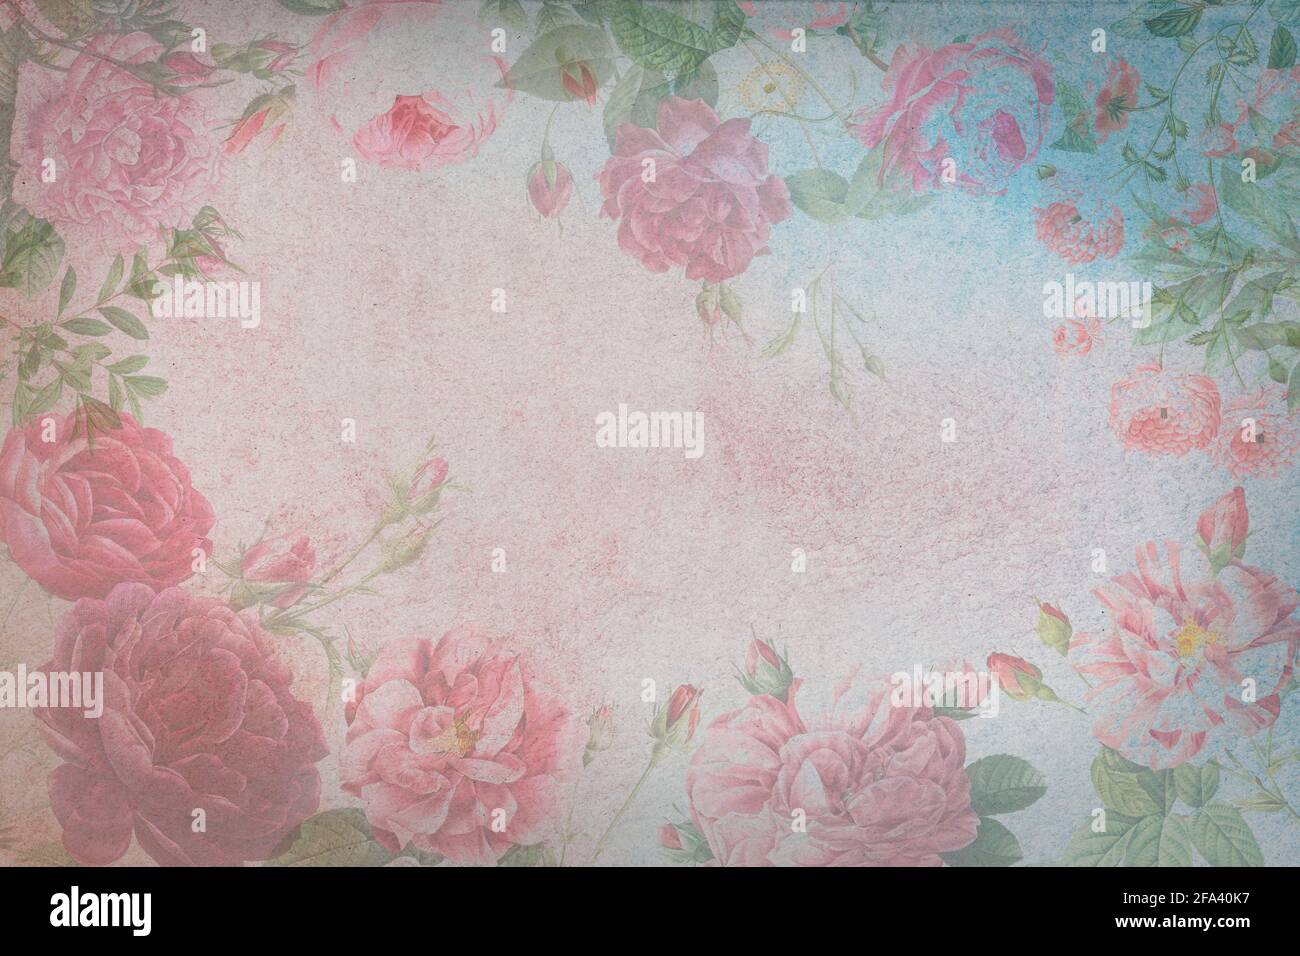 Decorative floral pink parchment paper for a background Stock